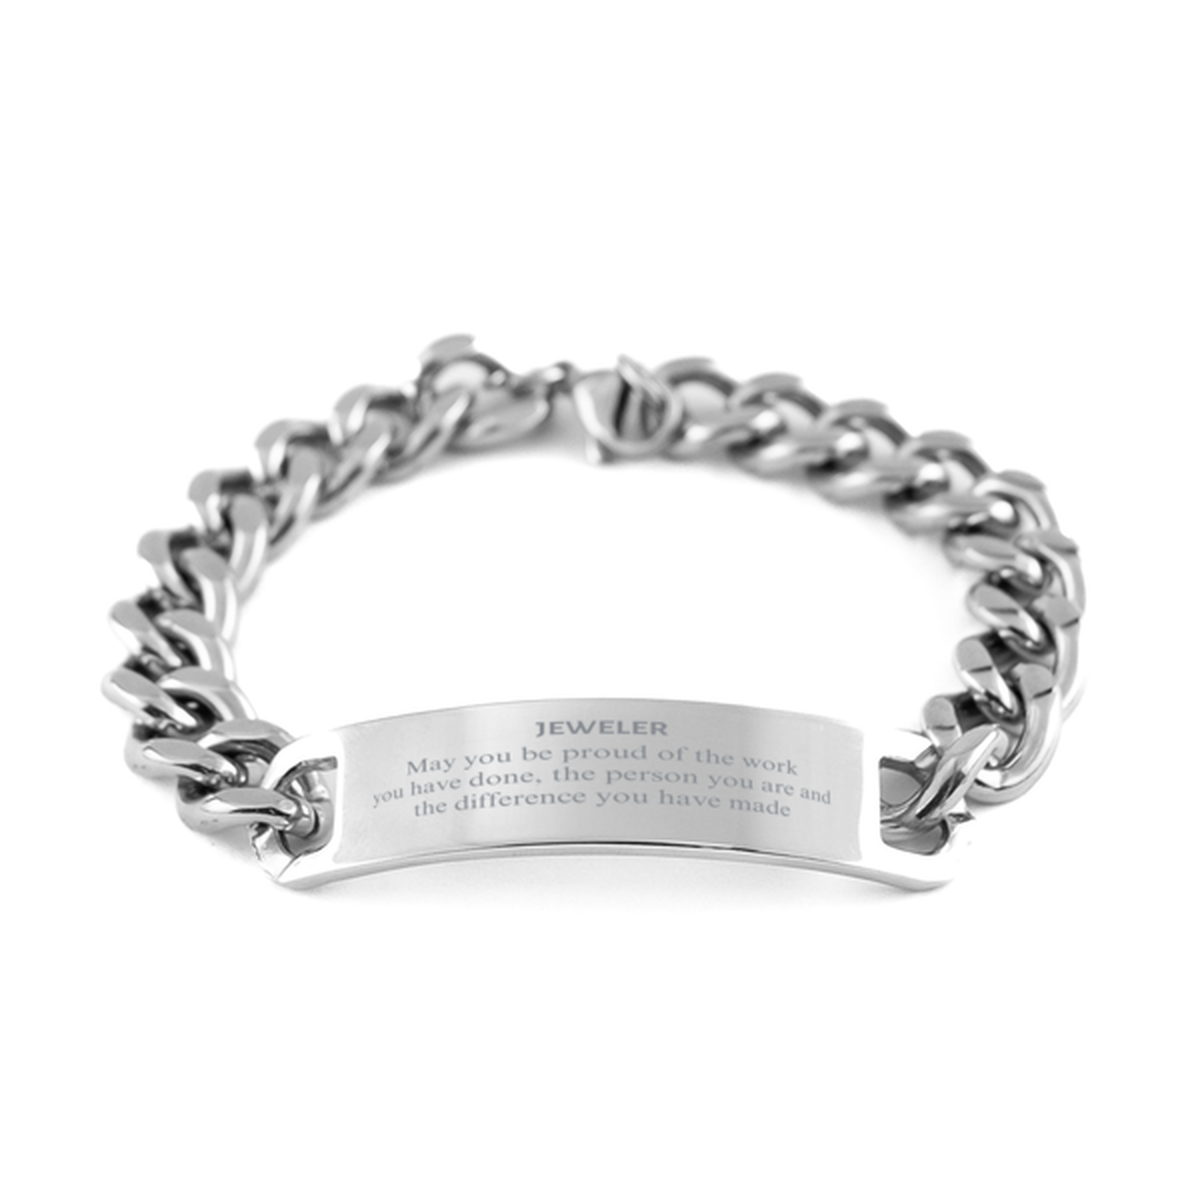 Jeweler May you be proud of the work you have done, Retirement Jeweler Cuban Chain Stainless Steel Bracelet for Colleague Appreciation Gifts Amazing for Jeweler